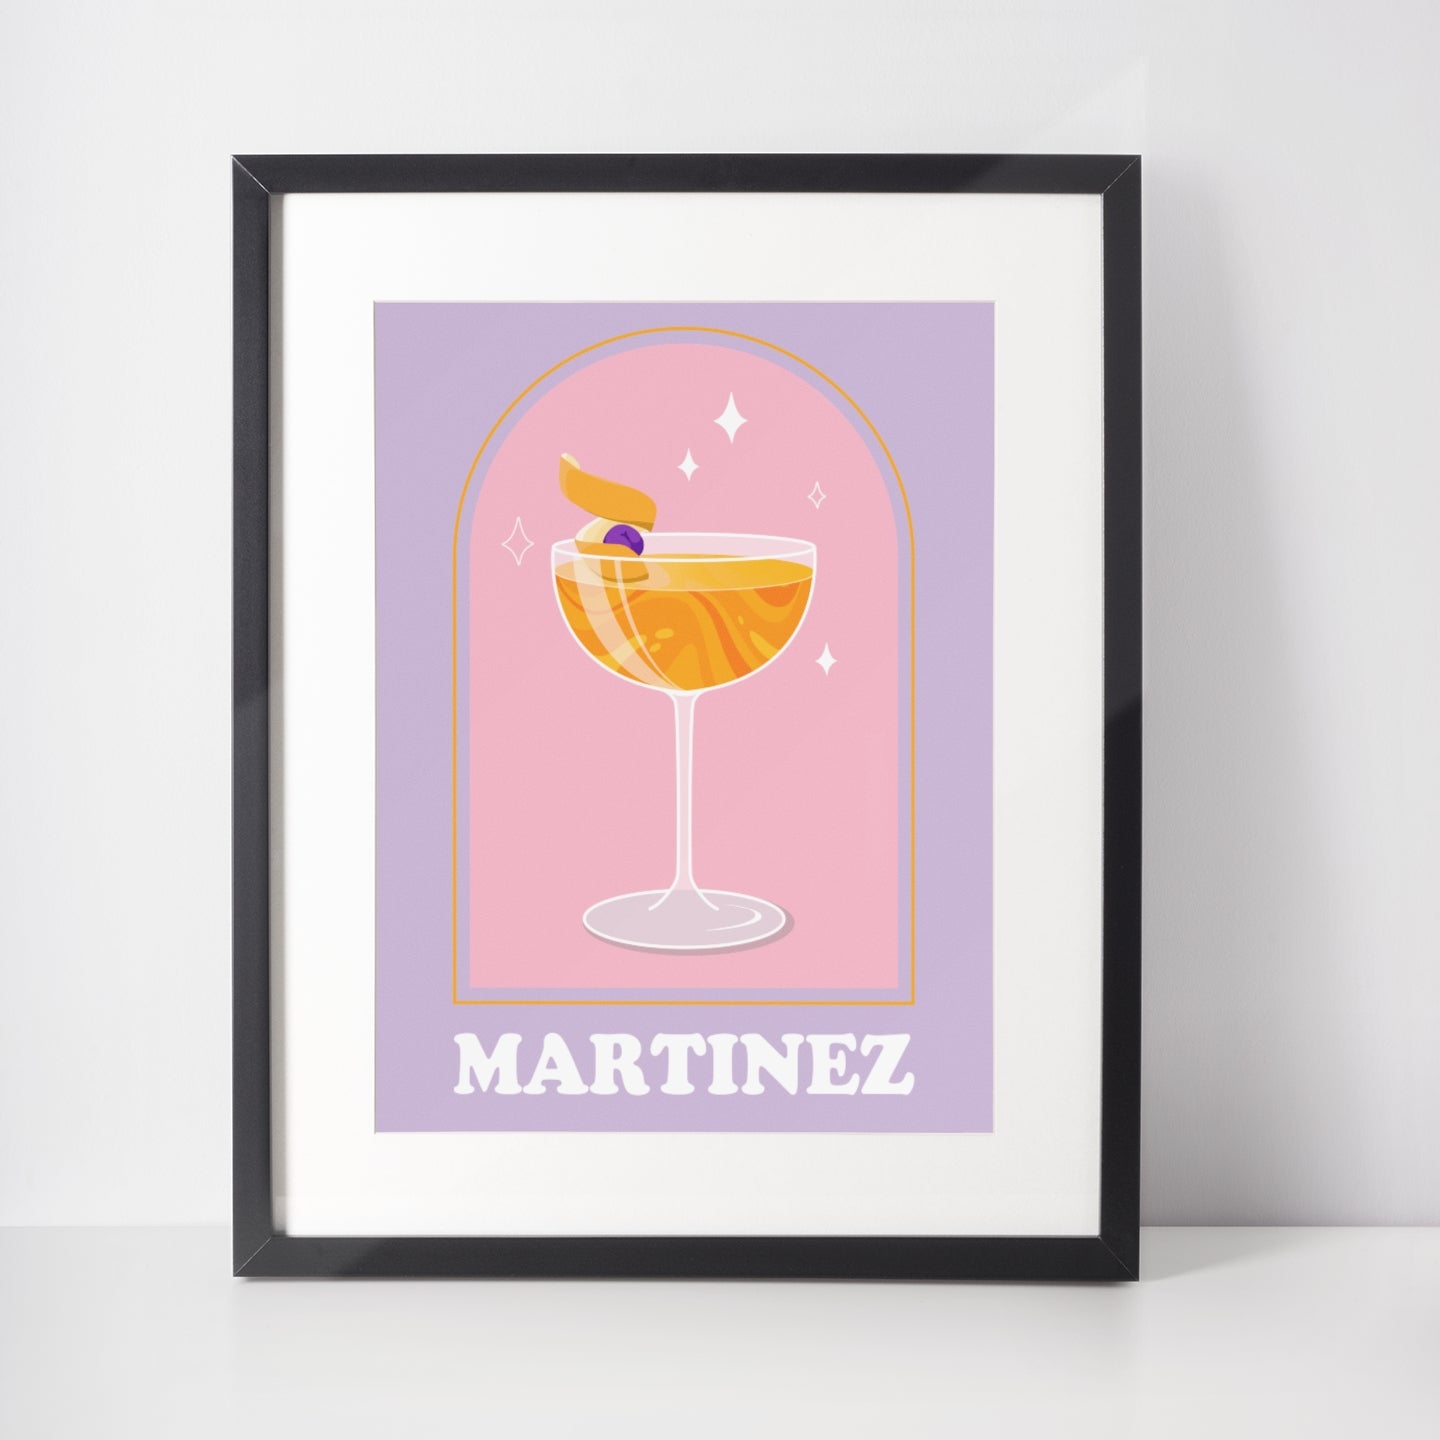 Martinez Art Print by Cocktail Critters